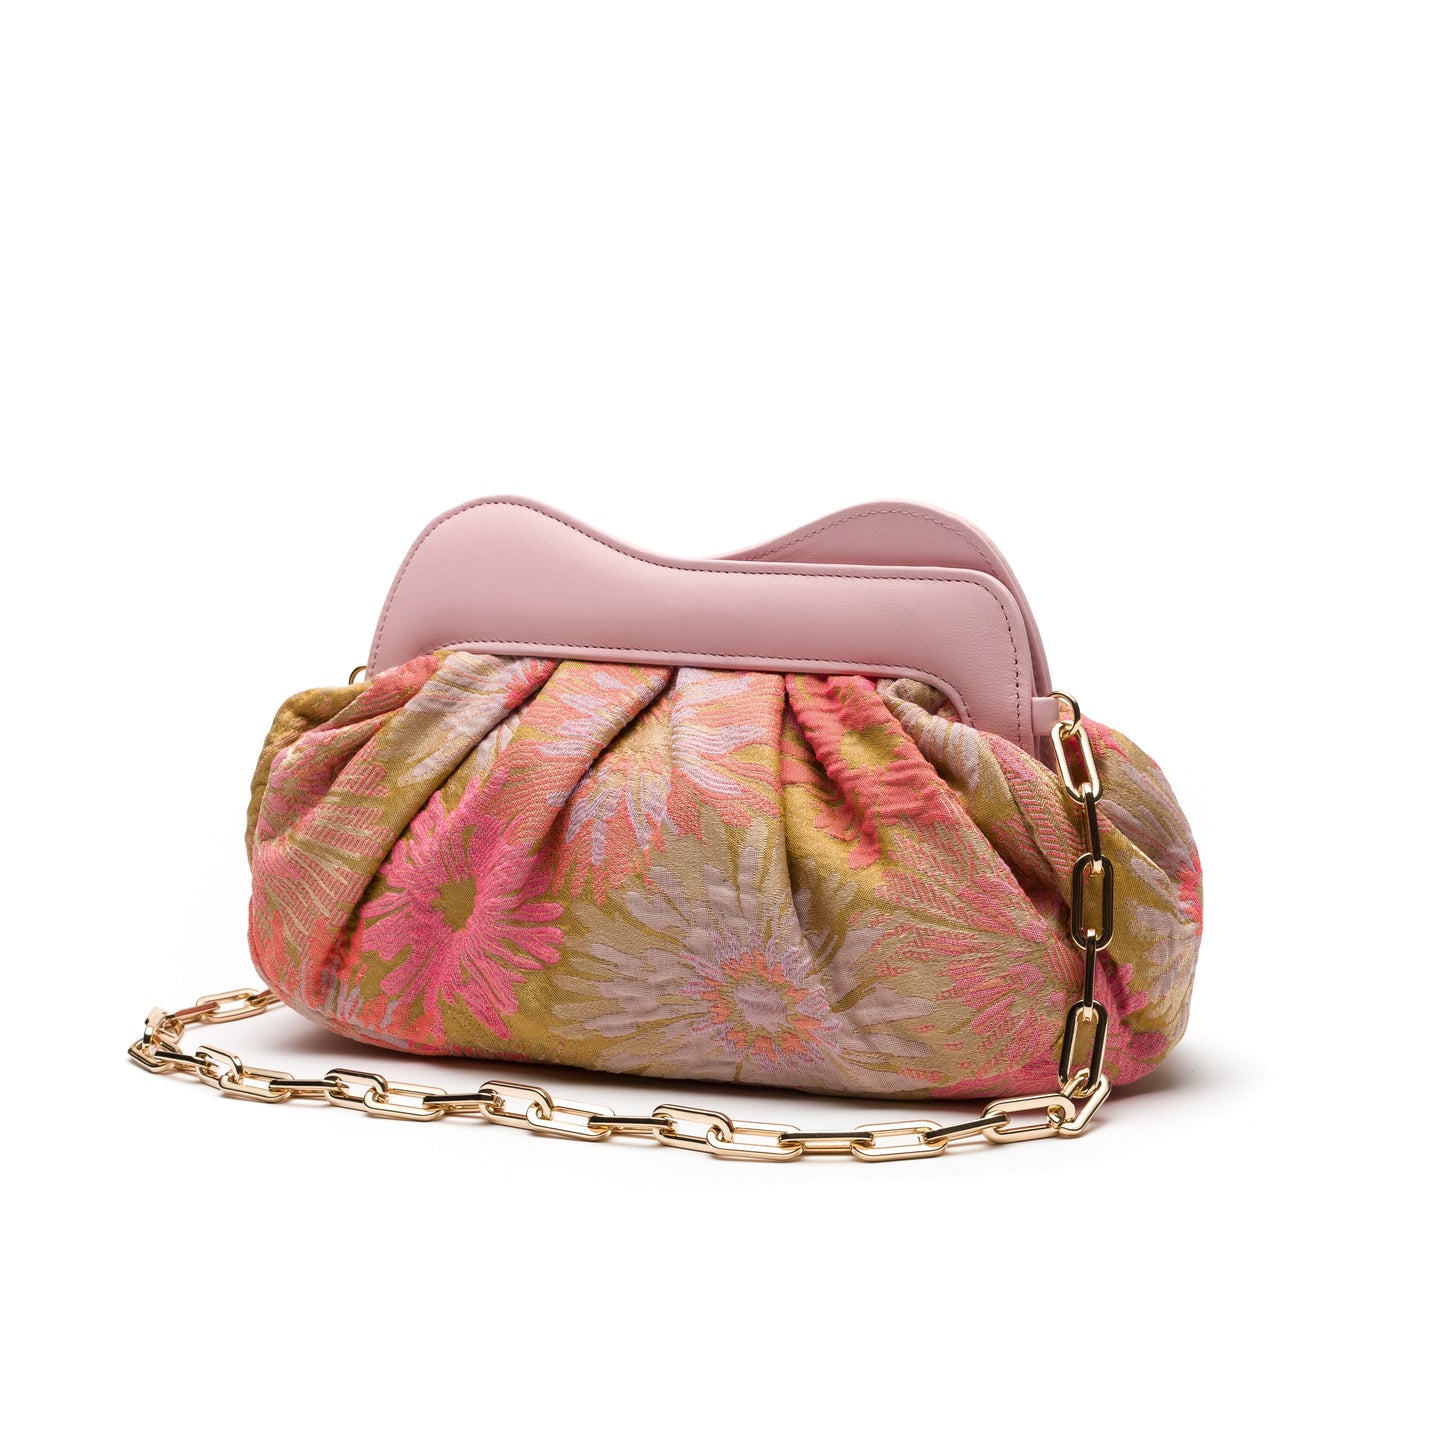 Alison- Pink Floral Fabric Clutch